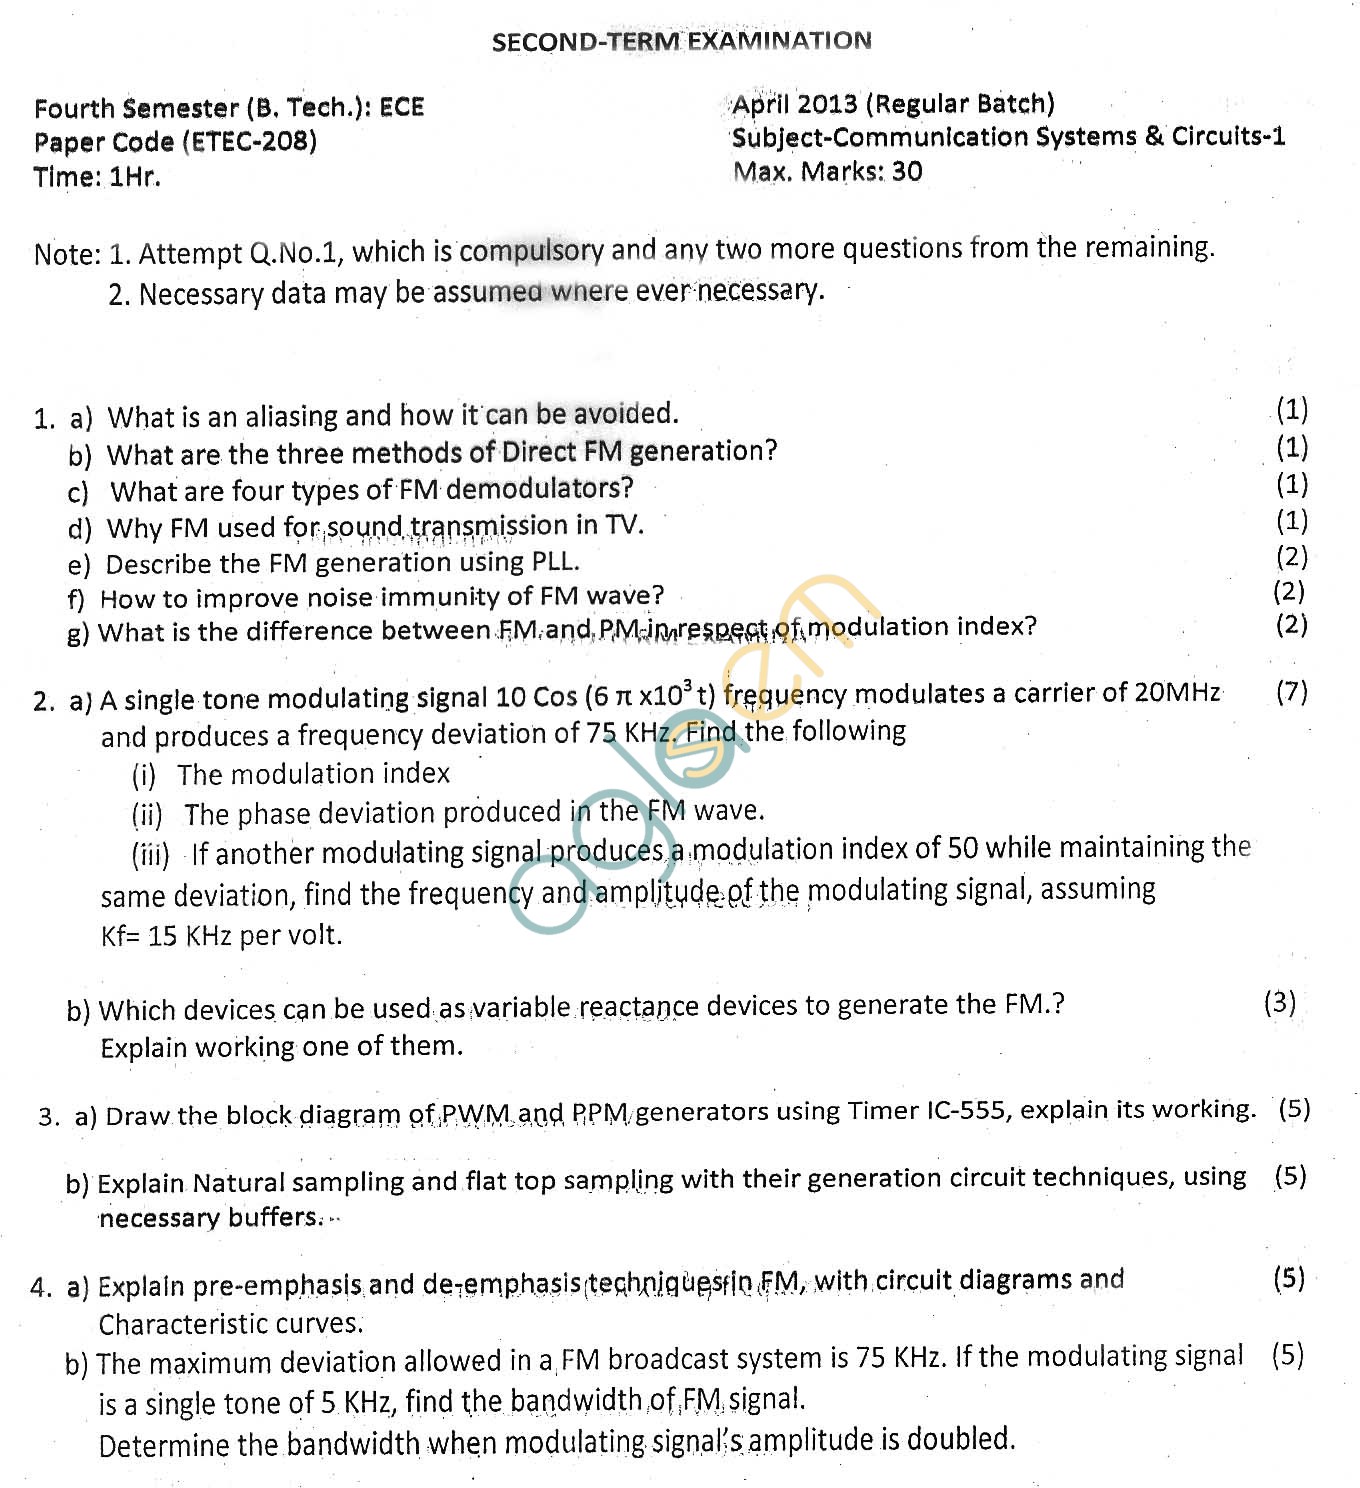 GGSIPU Question Papers Fourth Semester  Second Term 2013  ETEC-208